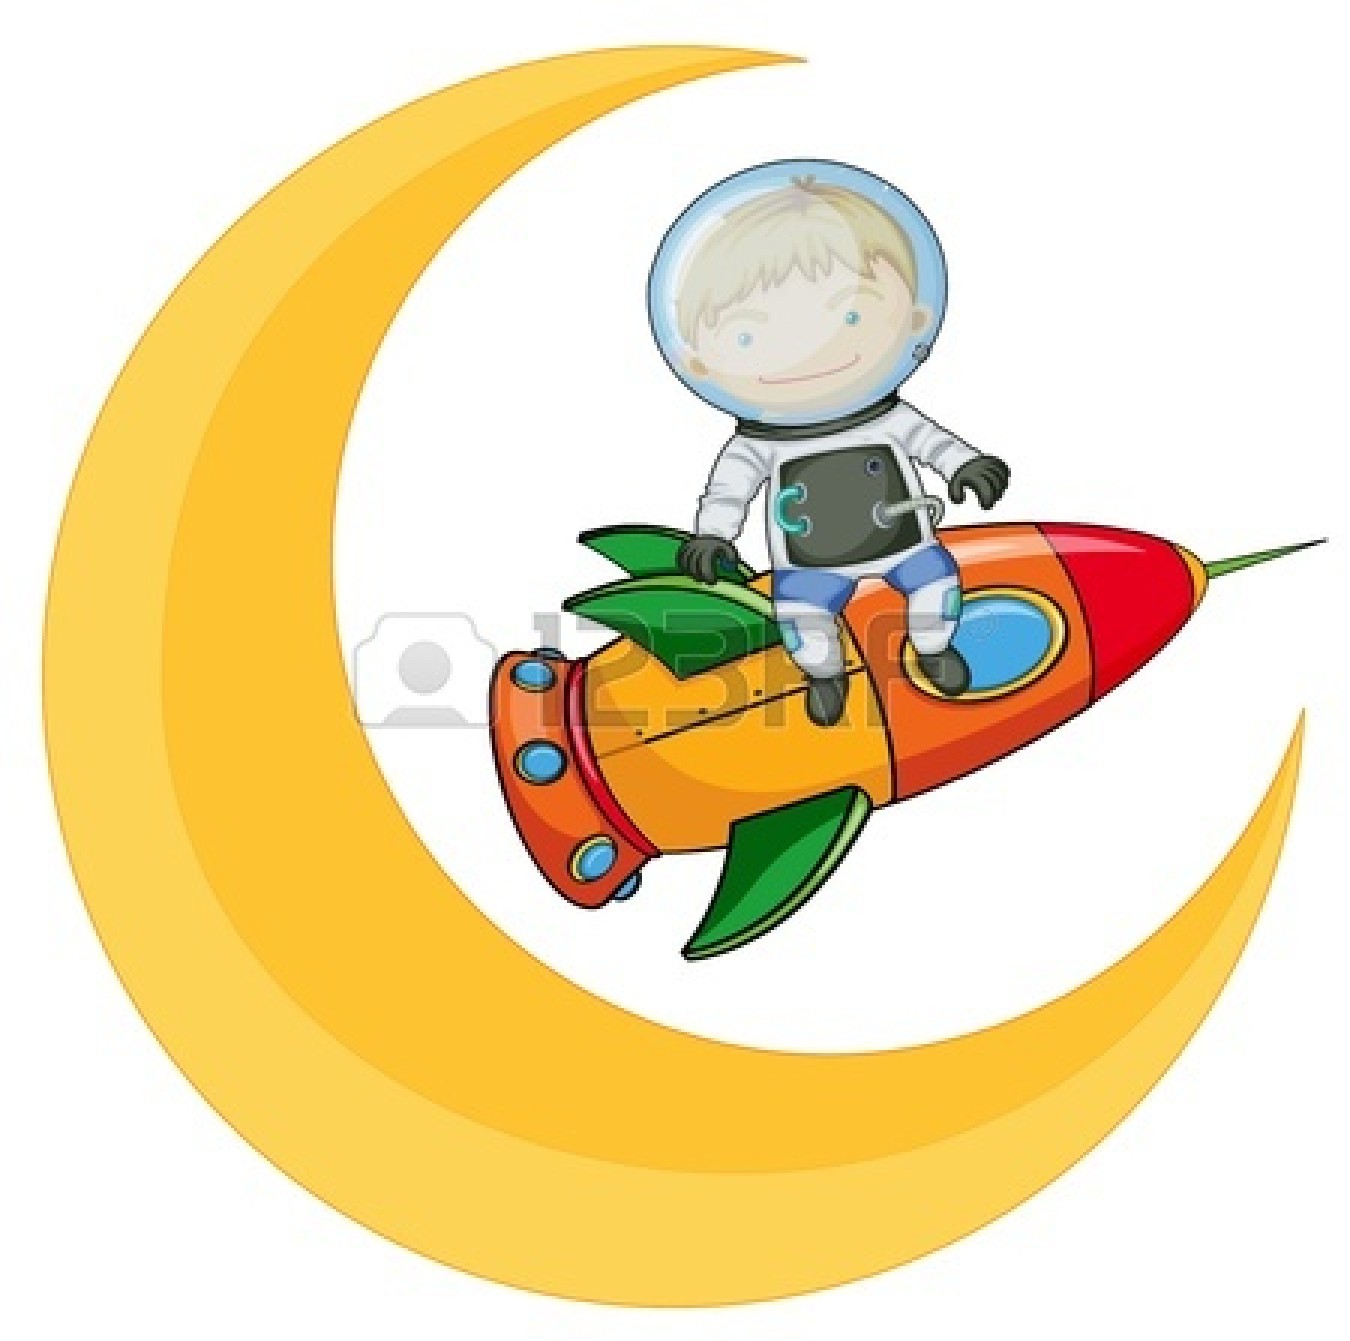 Man In The Moon Illustration   Clipart Panda   Free Clipart Images